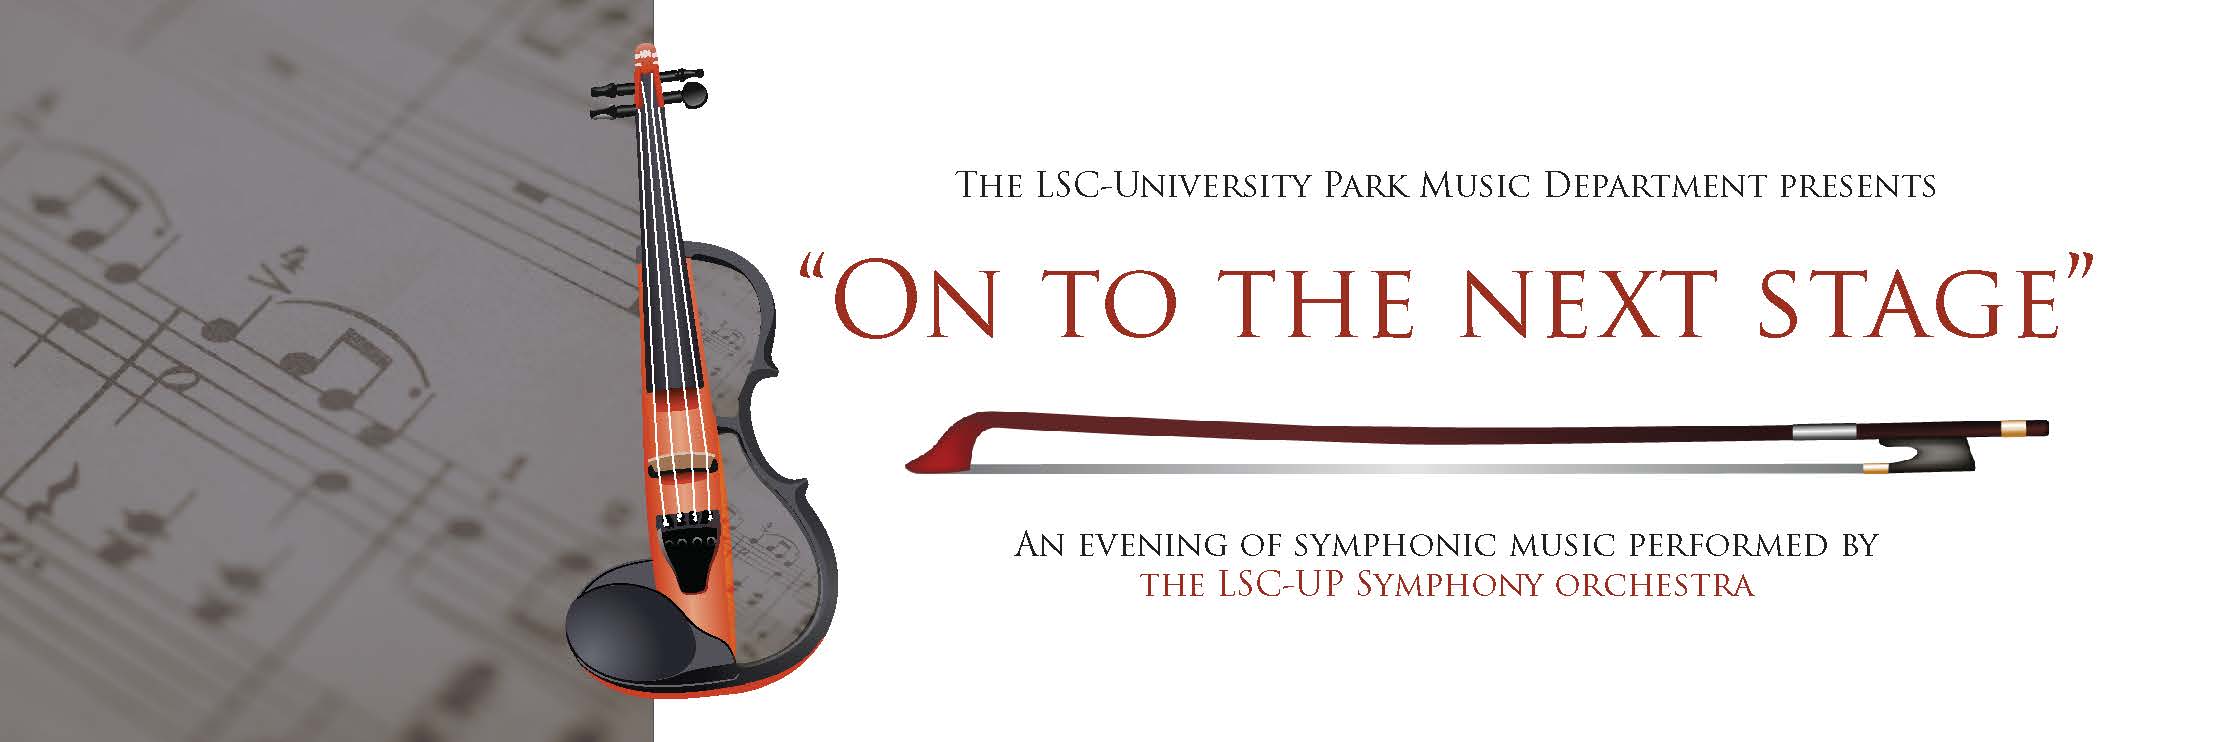 The LSC-University Park music department presents "On To the Next Stage" An evening of symphonic music performed by the LSC-UP Symphony Orchestra